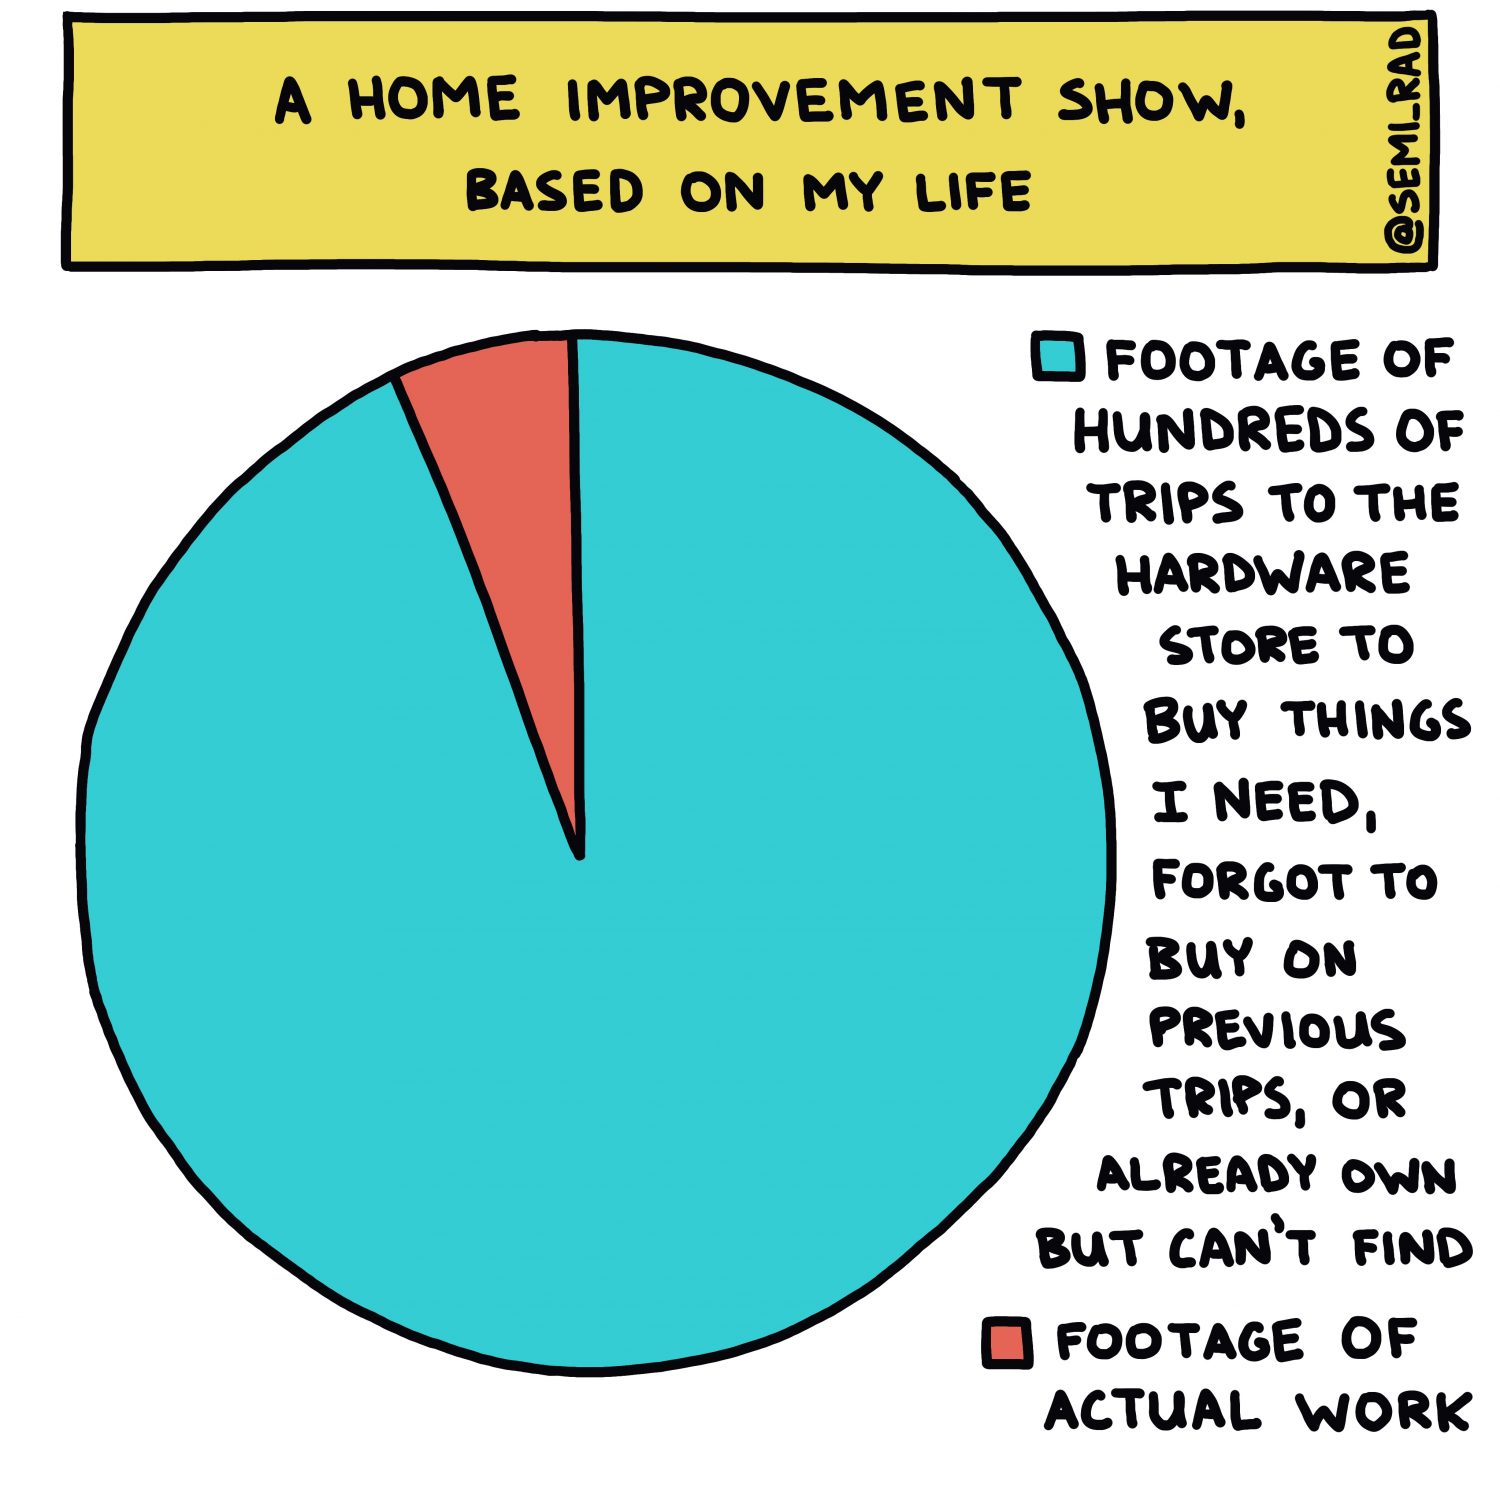 A Home Improvement Show, Based On My Life